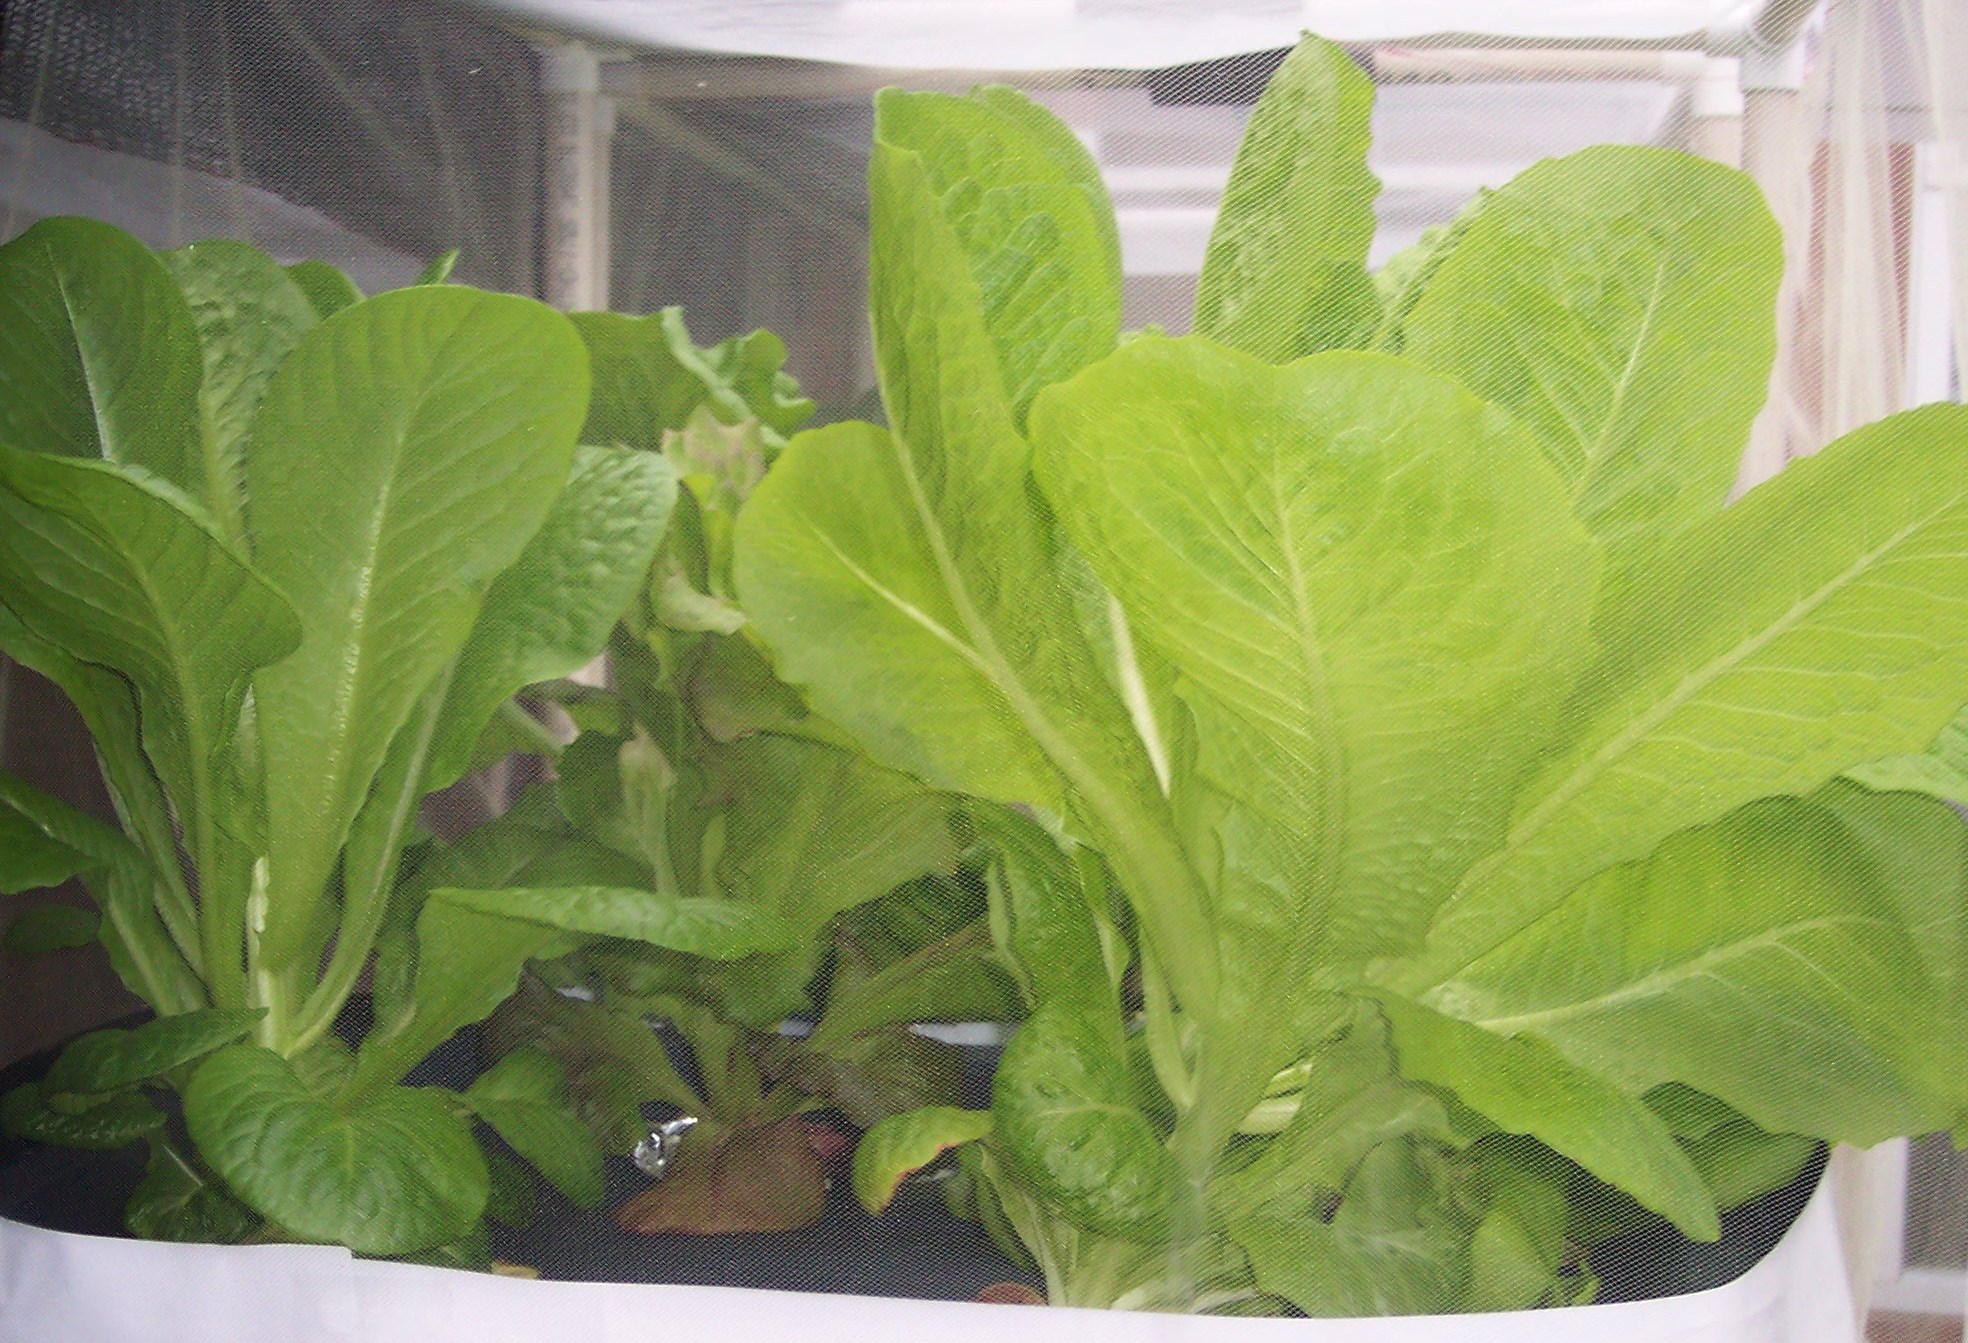 ... hydroponic containers- Romaine Lettuce growing outside in hydroponic